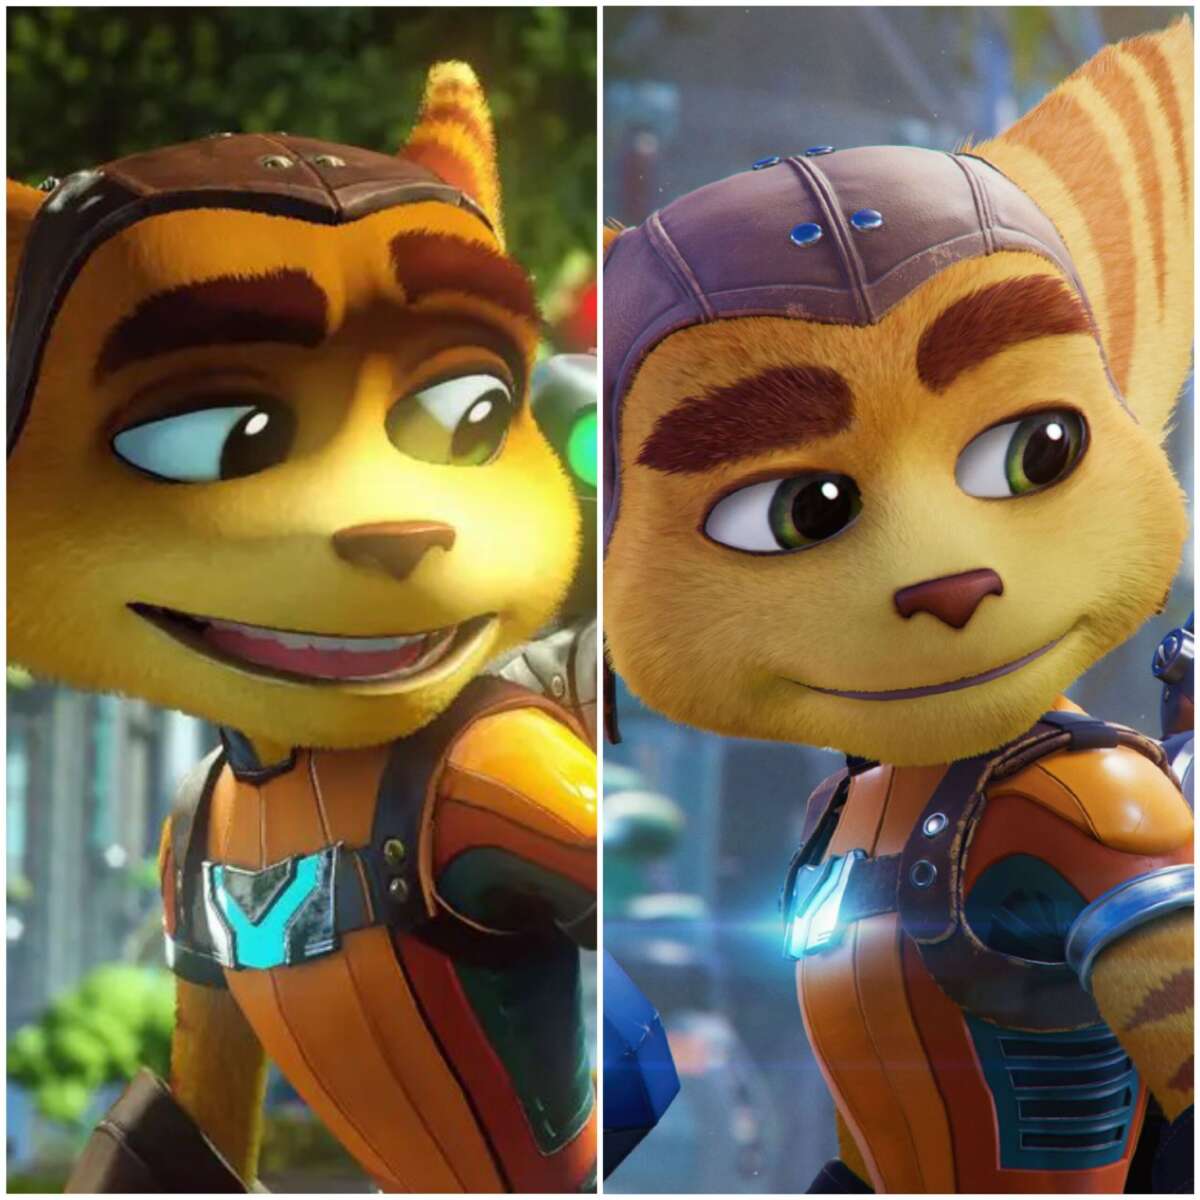 ratchet-and-clank-ps4-vs-ps5-scaled-1.jpg